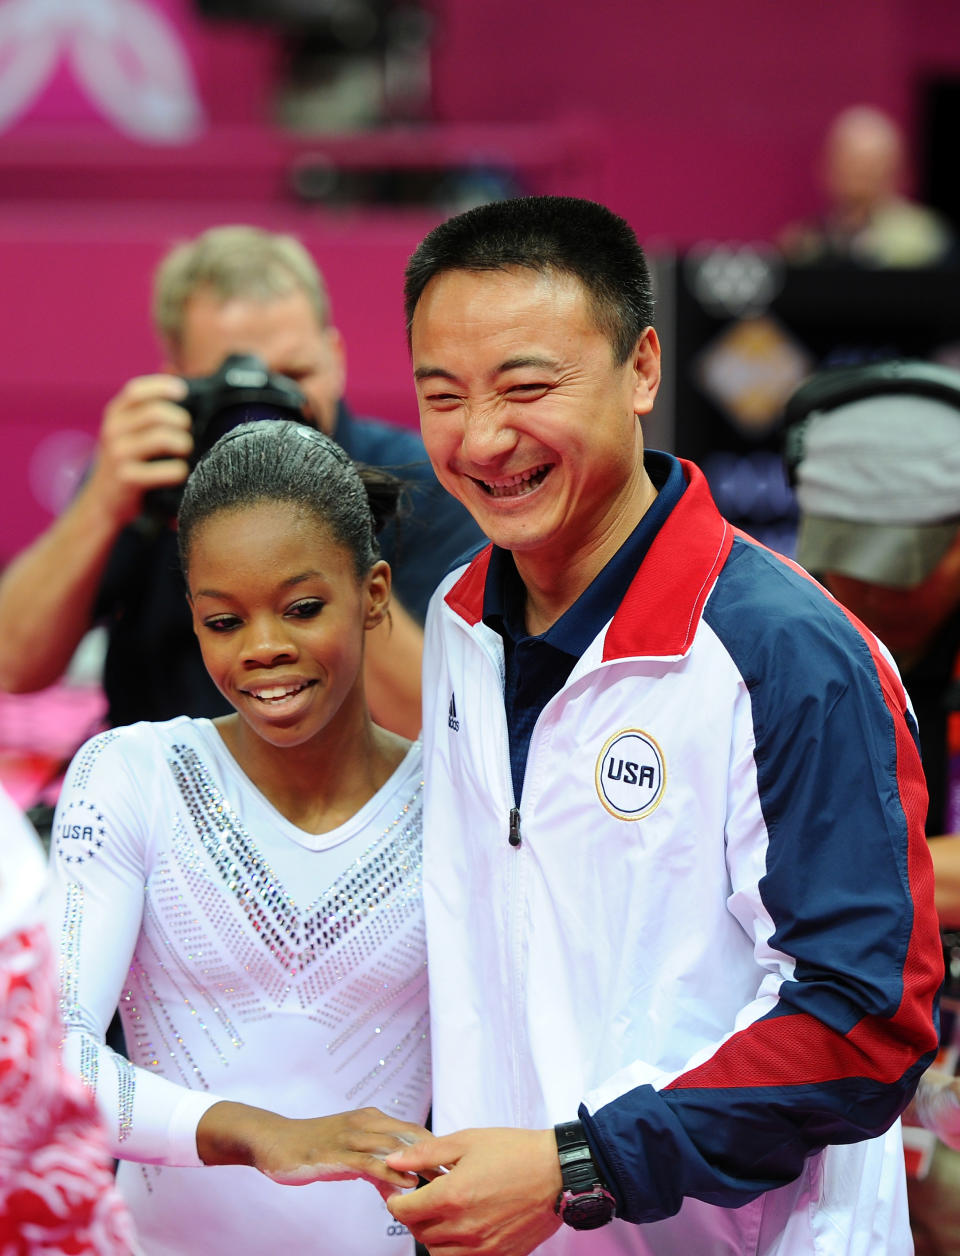 LONDON, ENGLAND - AUGUST 07: Gabrielle Douglas of the United States hugs her coach Liang Chow after she competes on the beam during the Artistic Gymnastics Women's Beam final on Day 11 of the London 2012 Olympic Games at North Greenwich Arena on August 7, 2012 in London, England. (Photo by Michael Regan/Getty Images)